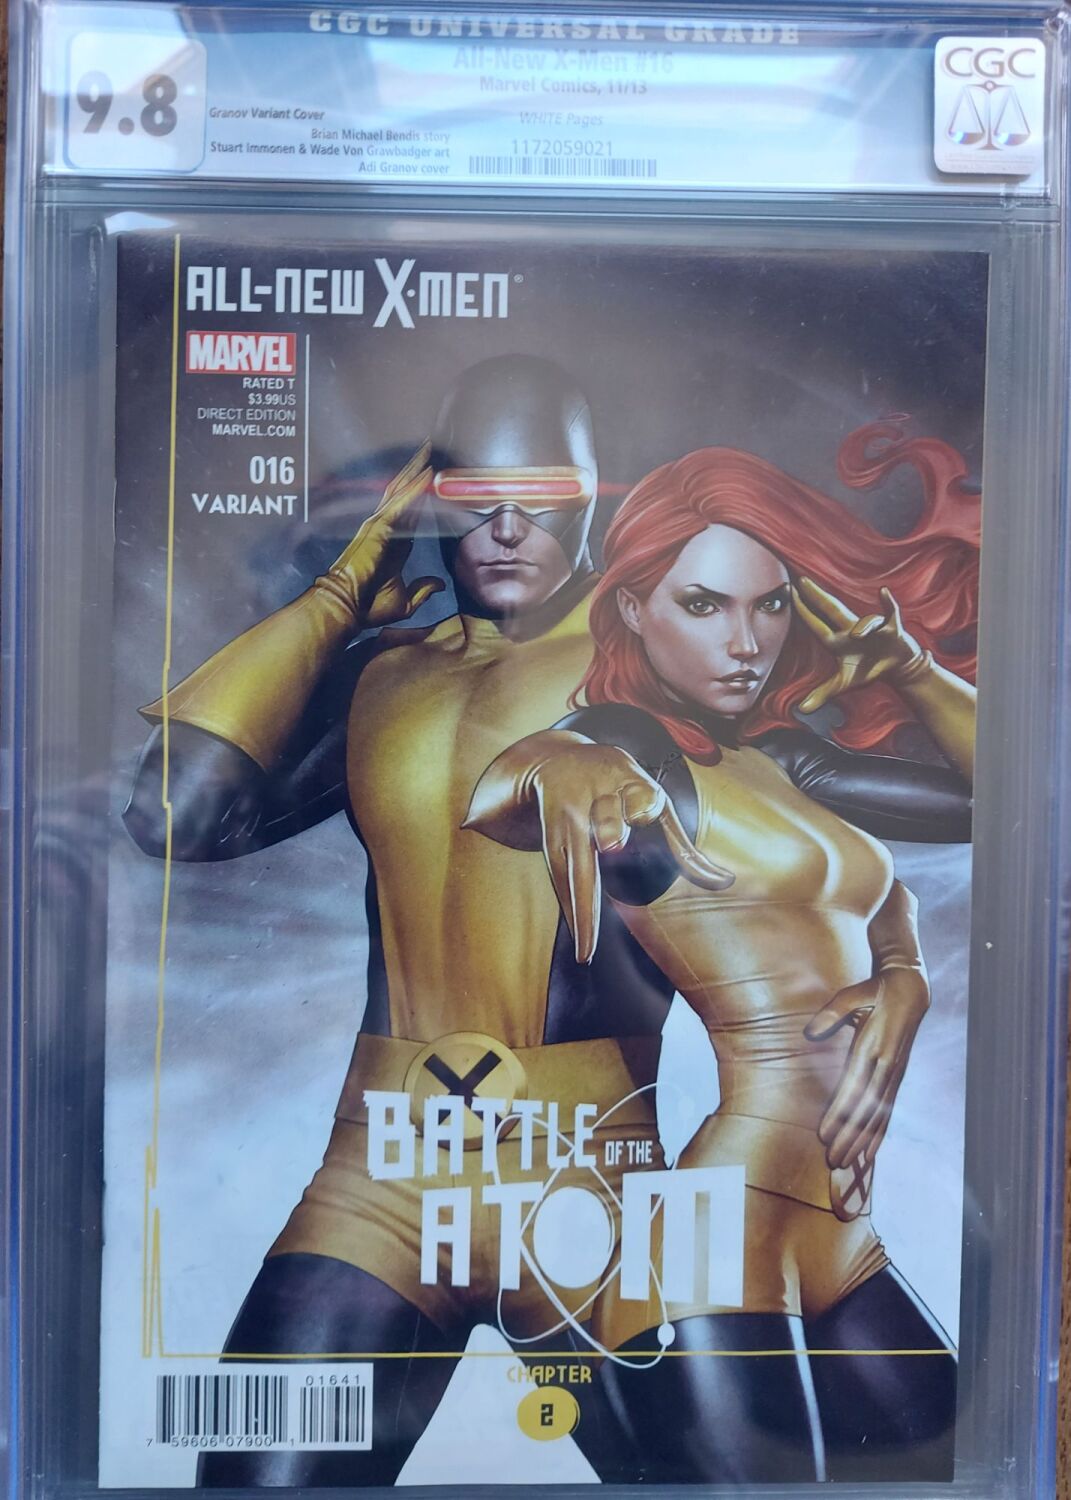 All New X-Men #16 Granov Variant Cover - CGC 9.8 - White Pages